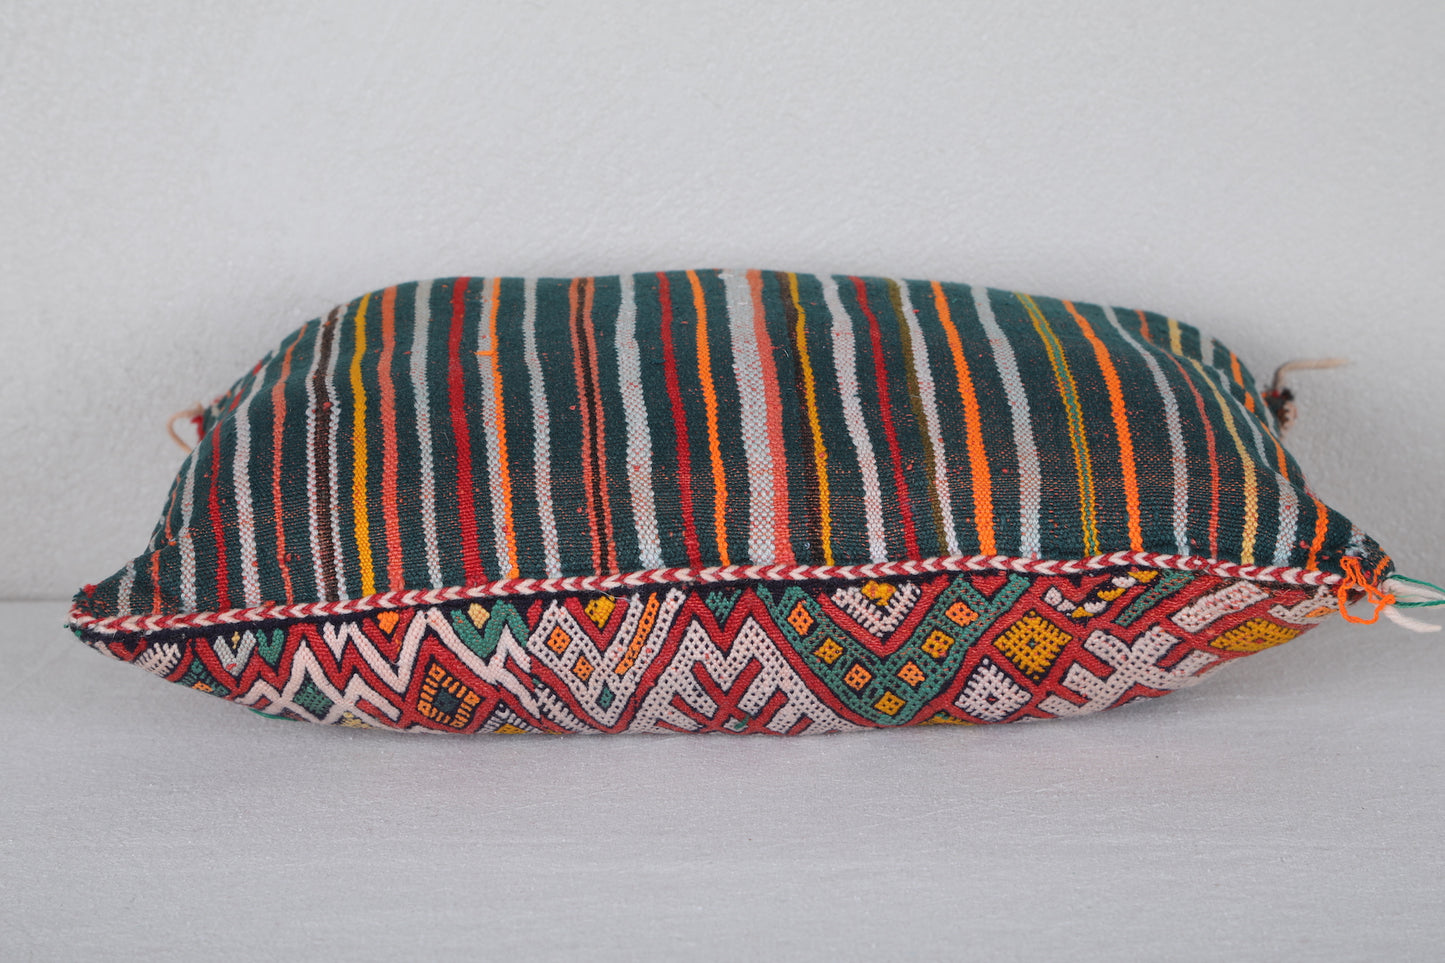 Vintage Moroccan Kilim Pillow 12.5 INCHES X 17.7 INCHES